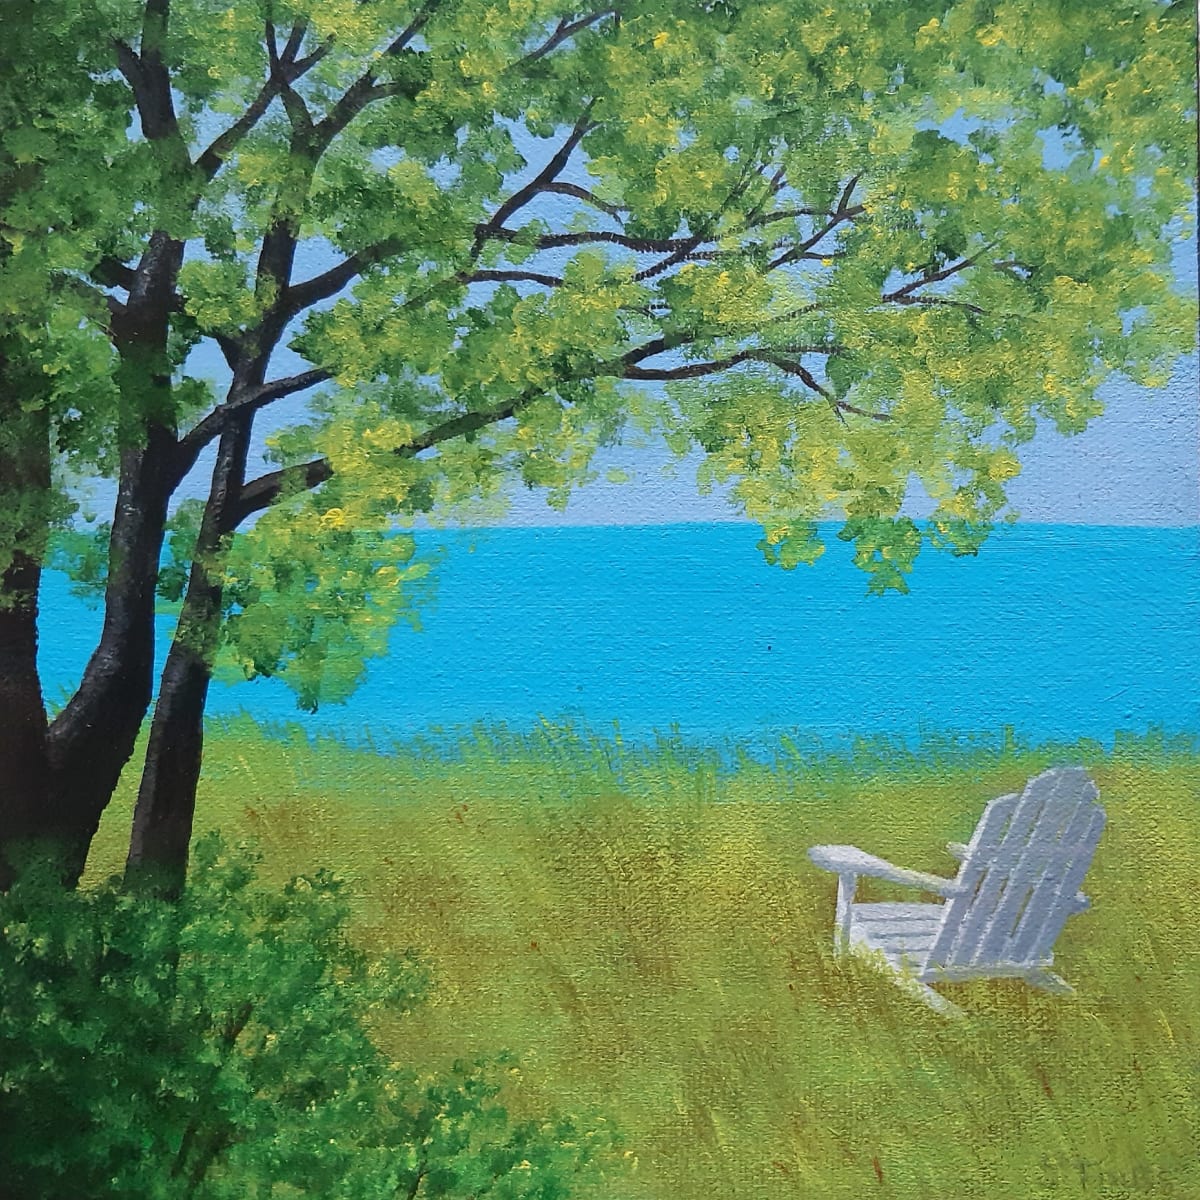 Summer By The Lake by Jane Thuss  Image: A single muskoka chair sits overlooking a blue lake on a summer day.